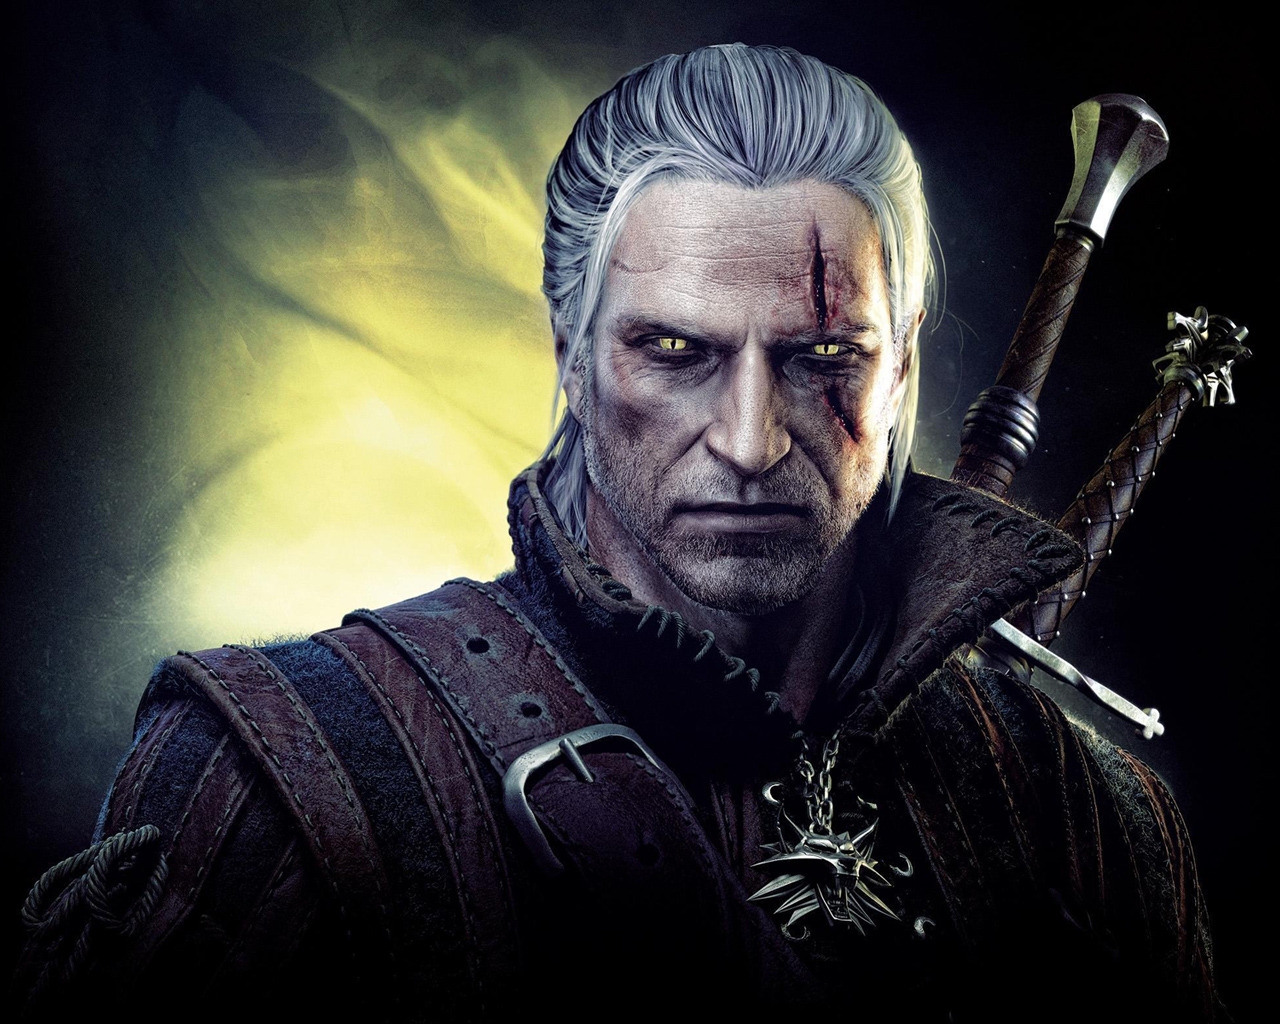 The Witcher 2 Assassins of Kings for 1280 x 1024 resolution